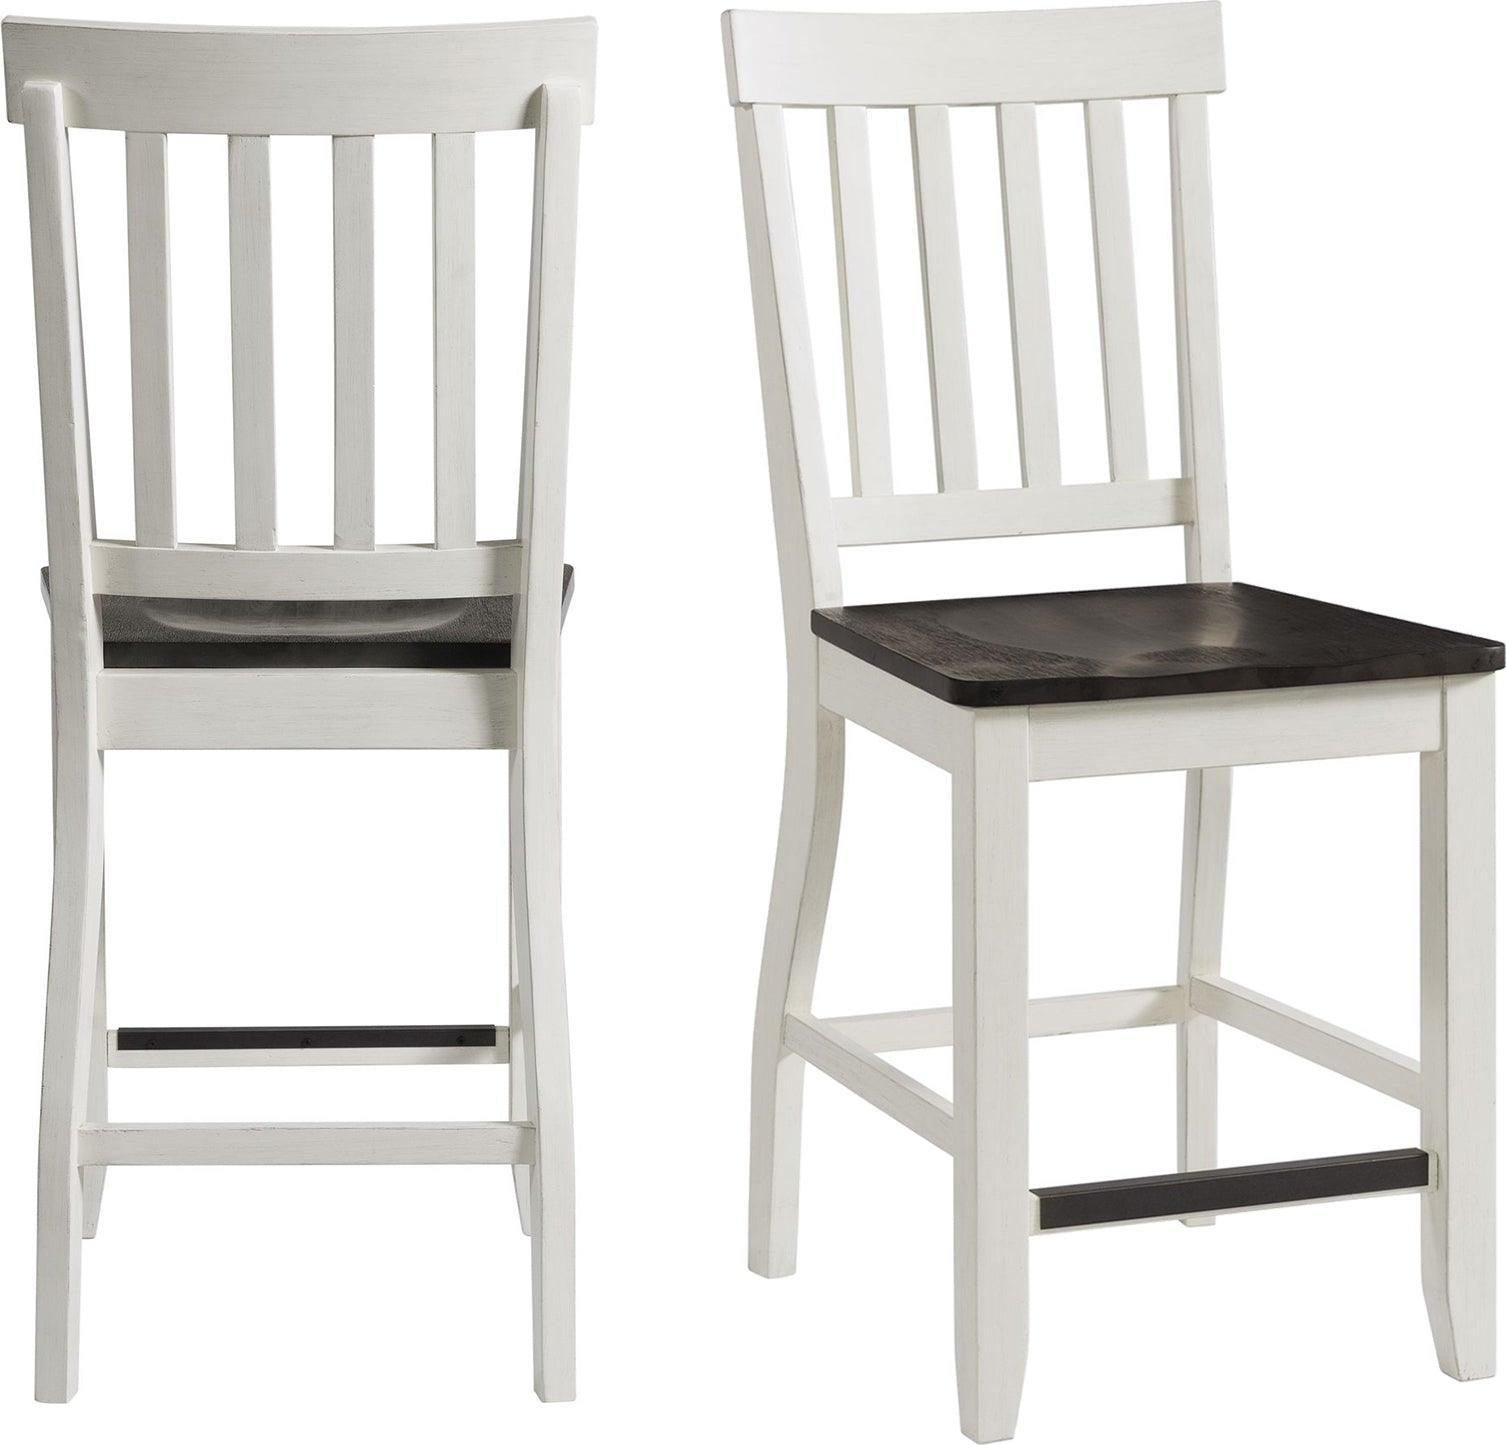 Elements Barstools - Jamison Two Tone Counter Height Side Chair Set (Set of 2)